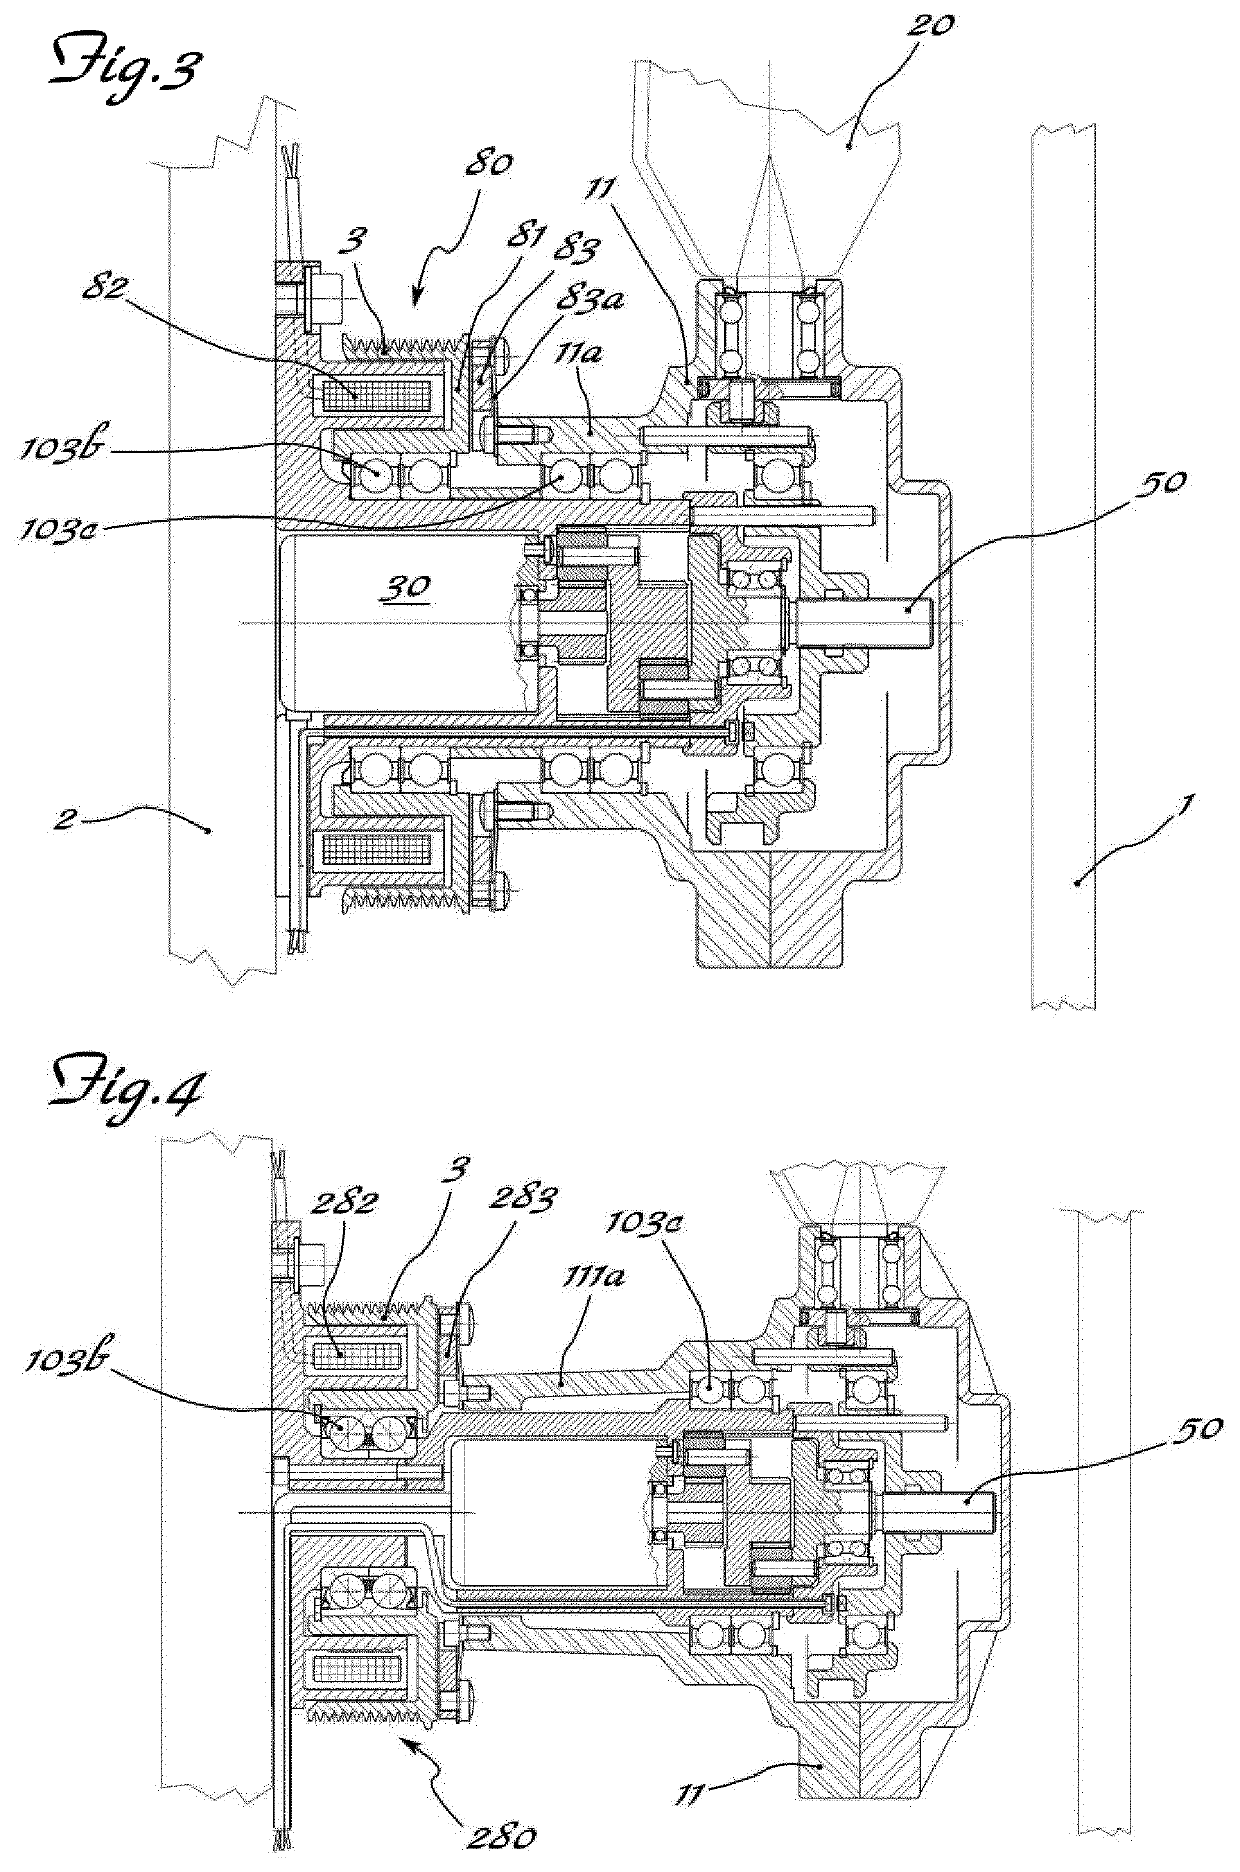 Apparatus for actuating and controlling the rotation of blades of fans for cooling the coolant in machines/vehicles